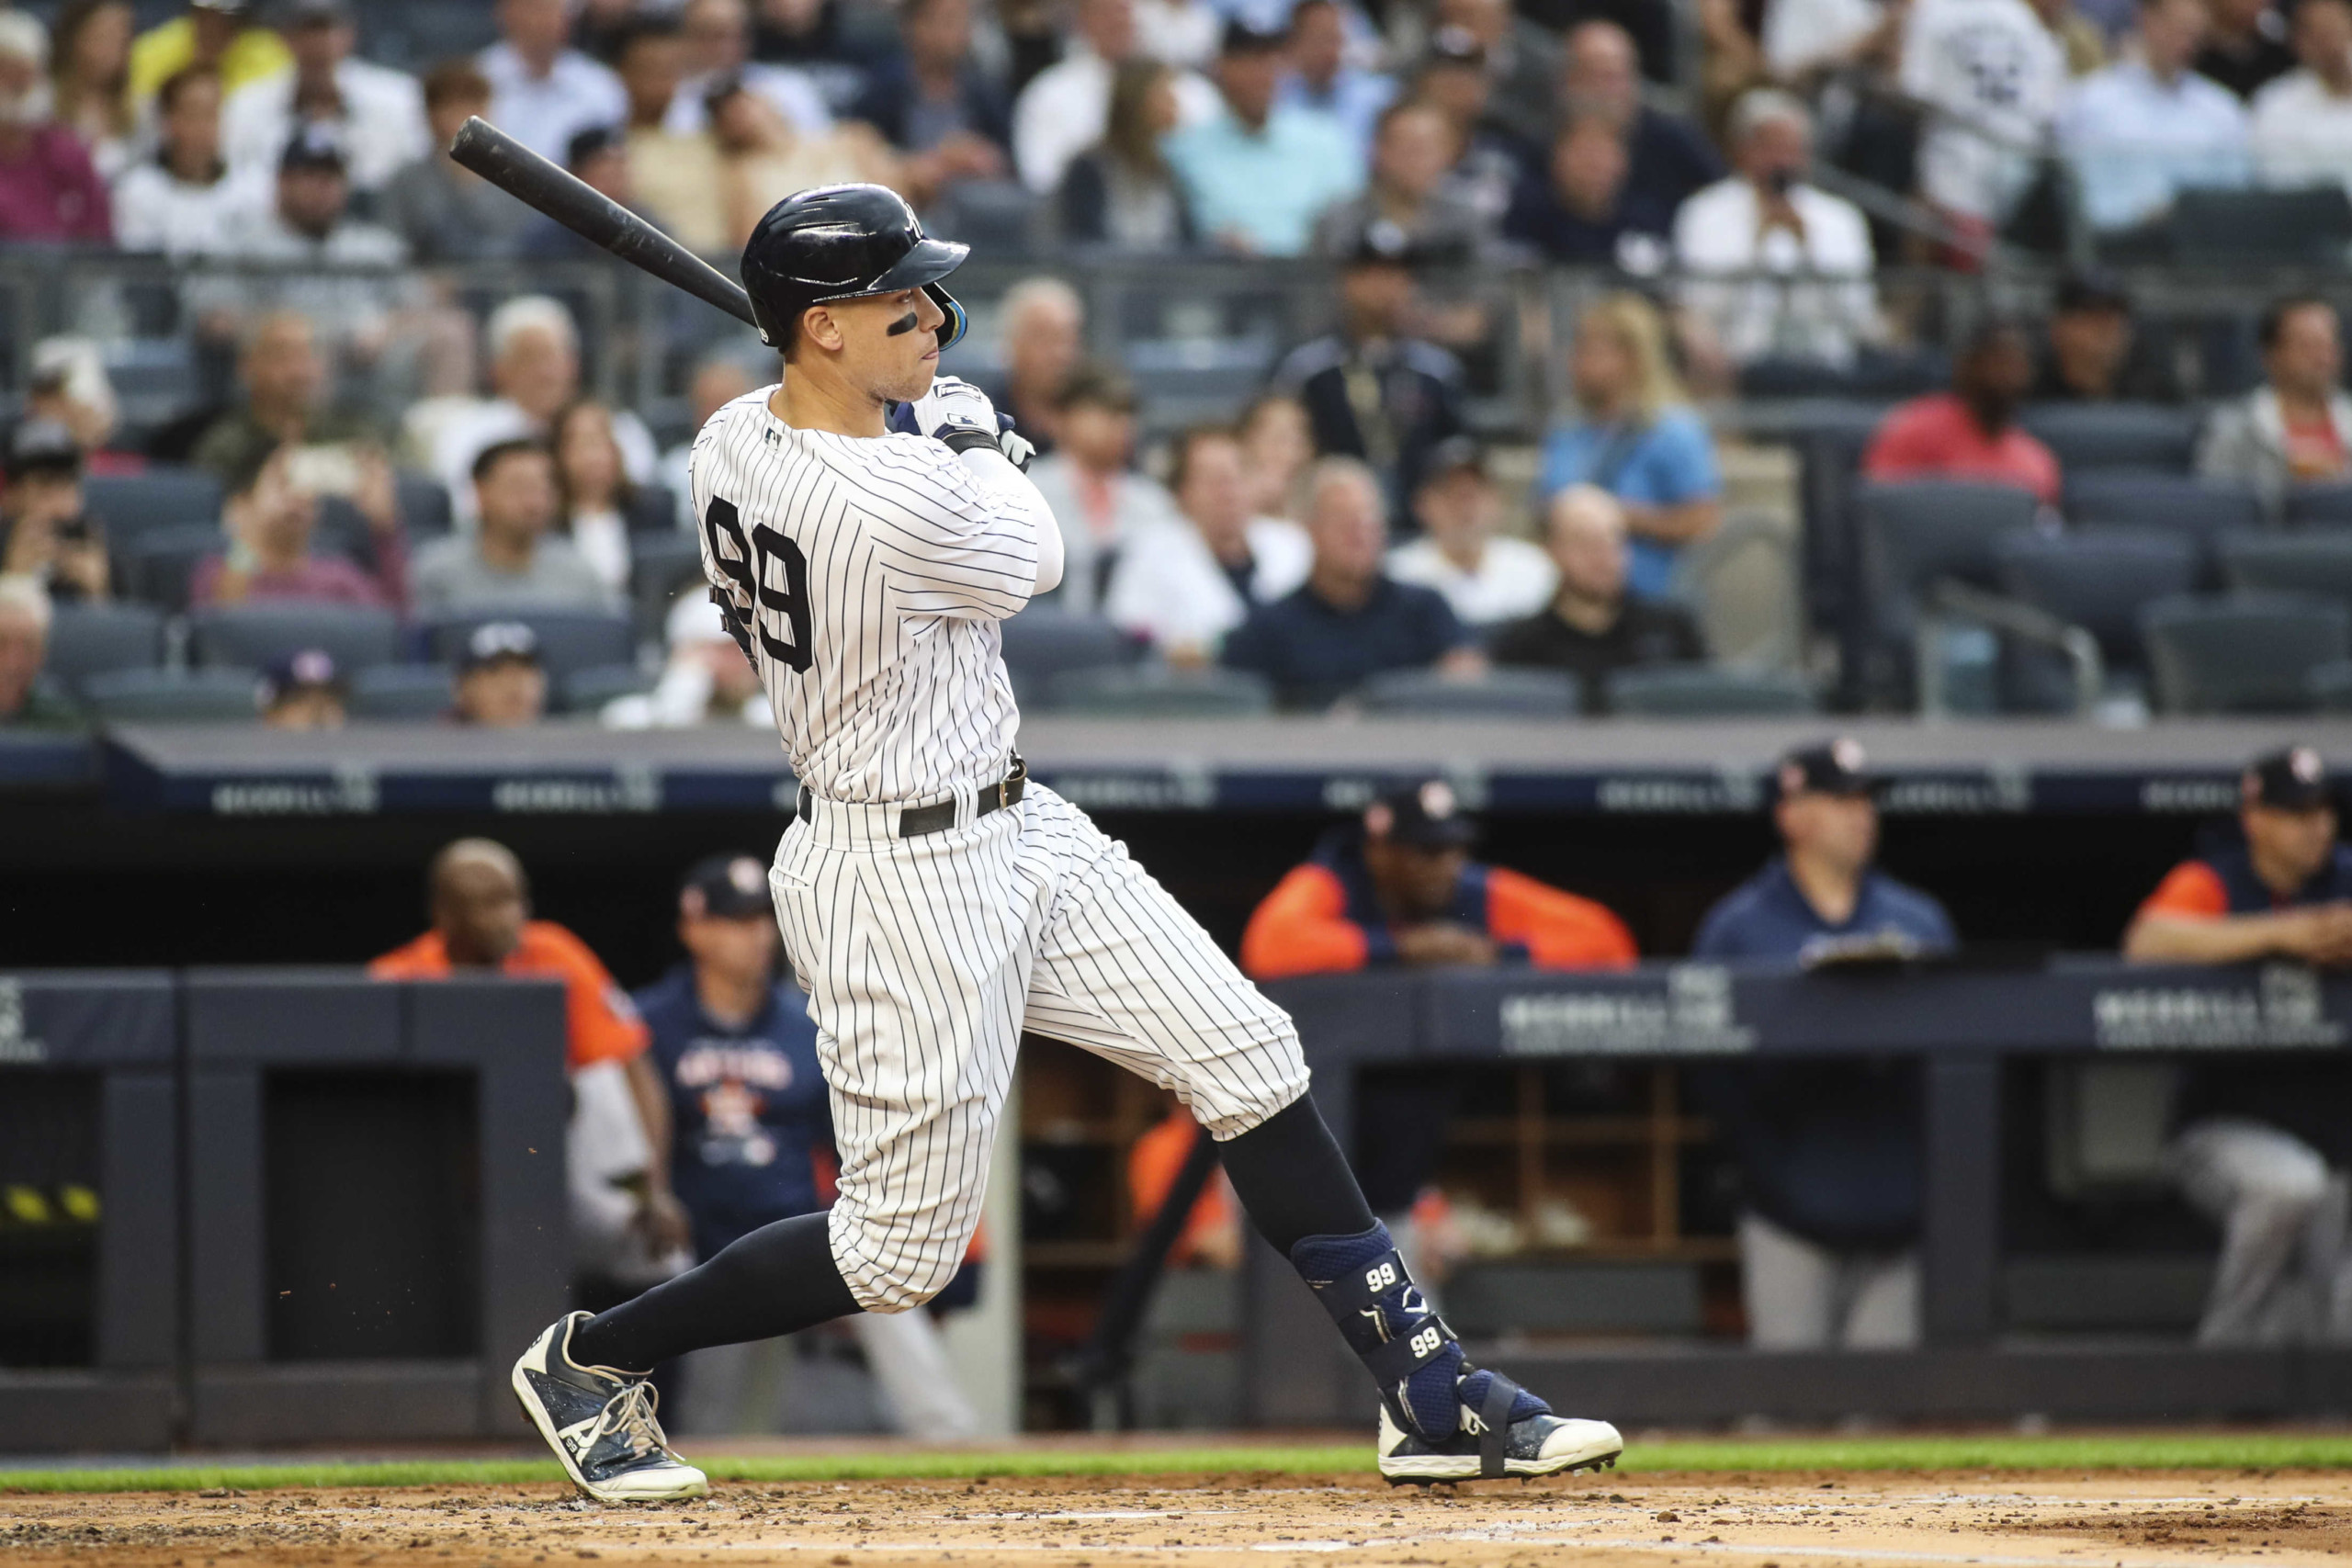 Aaron Judge could make $300 million next year